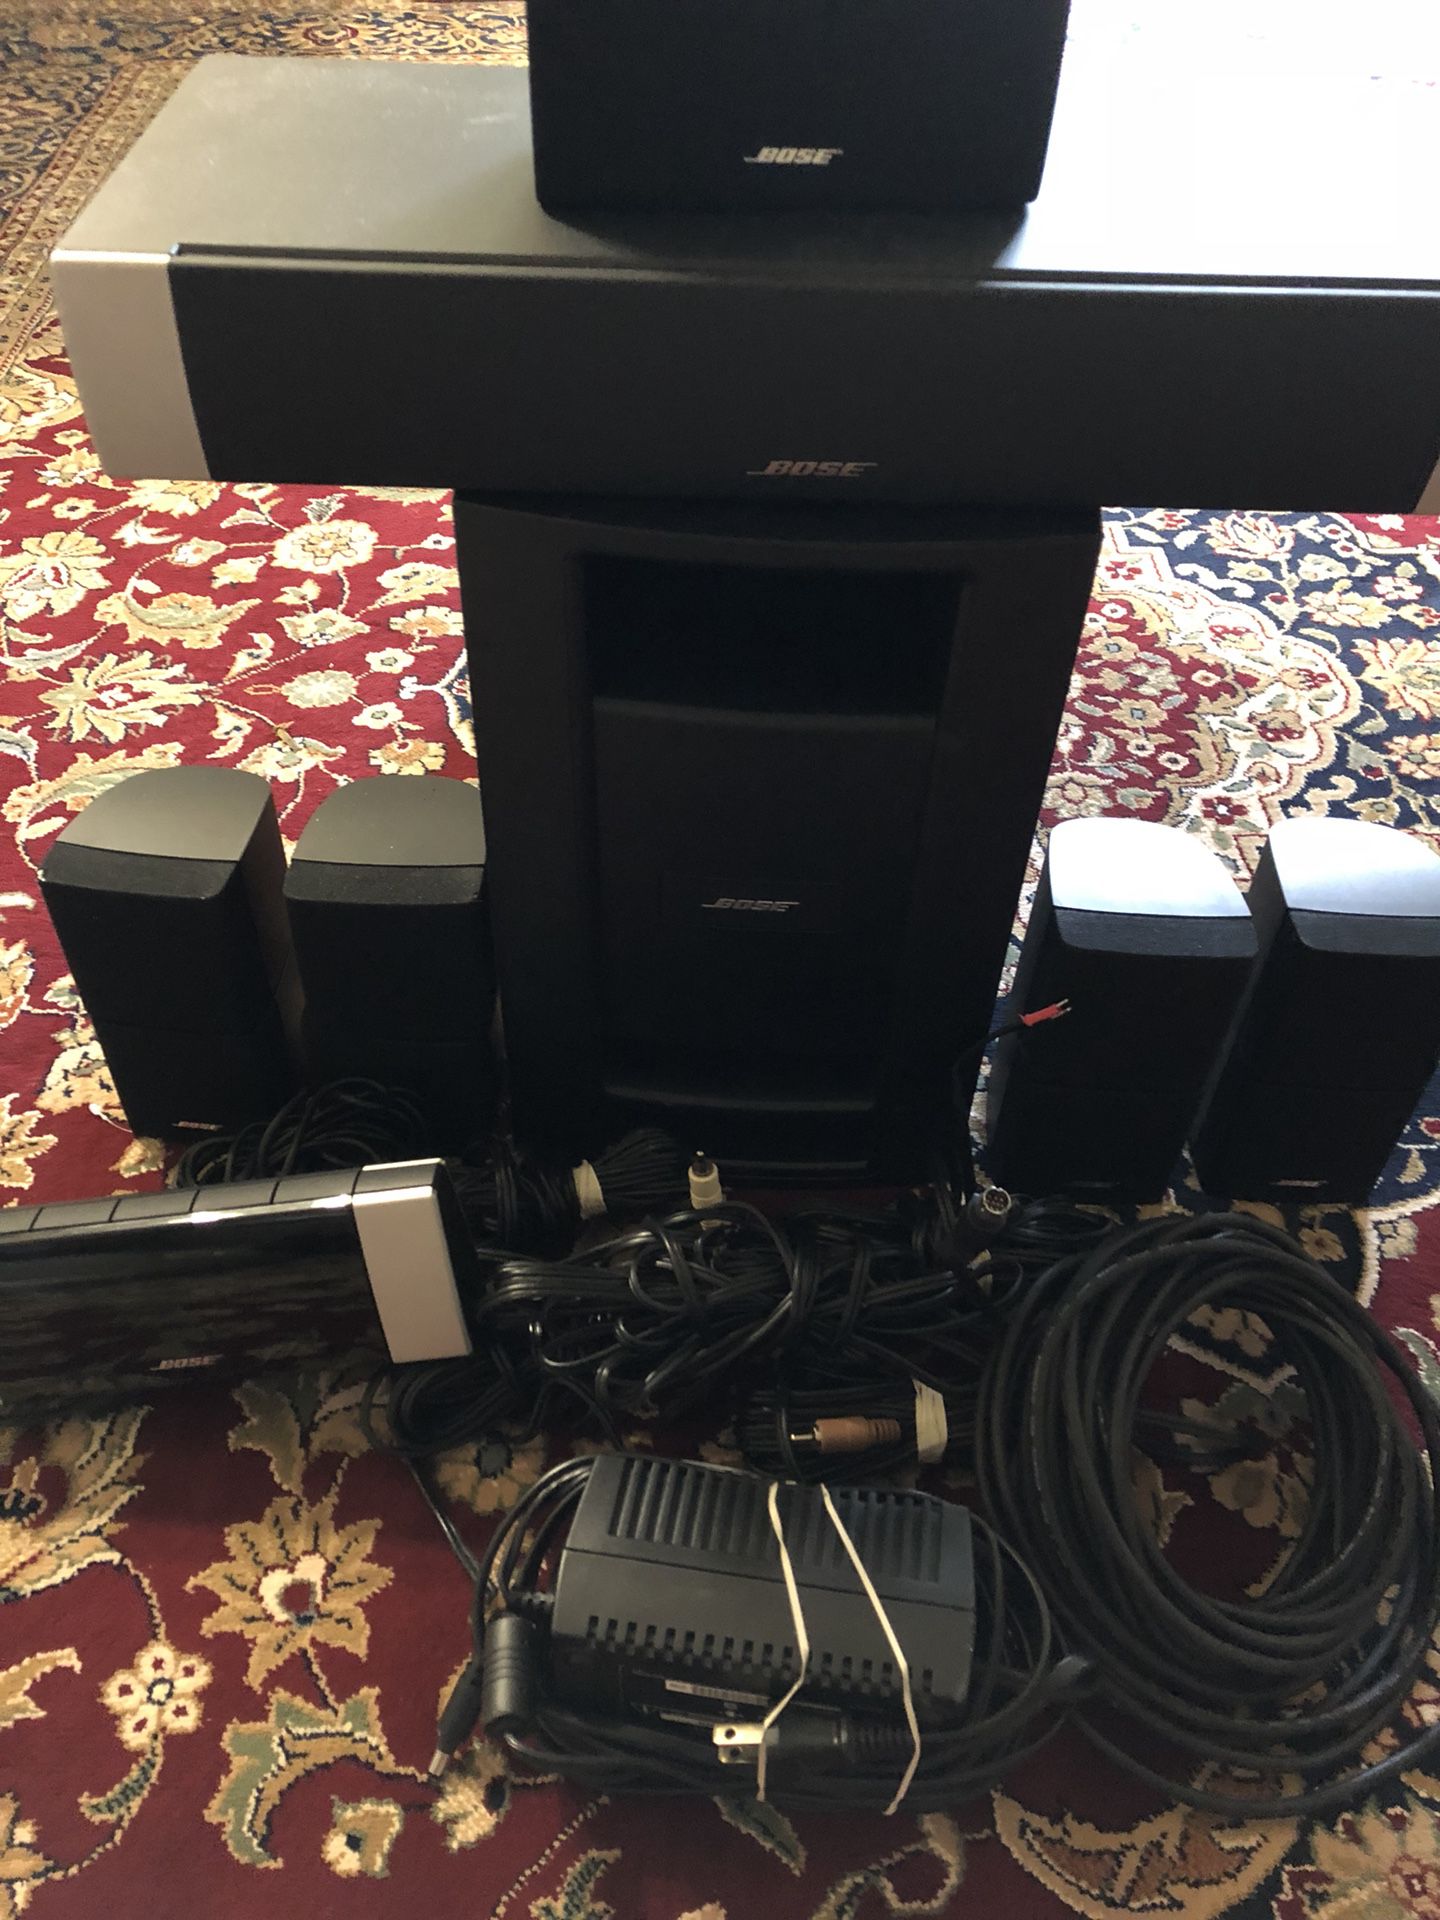 Bose ps28 iii music system